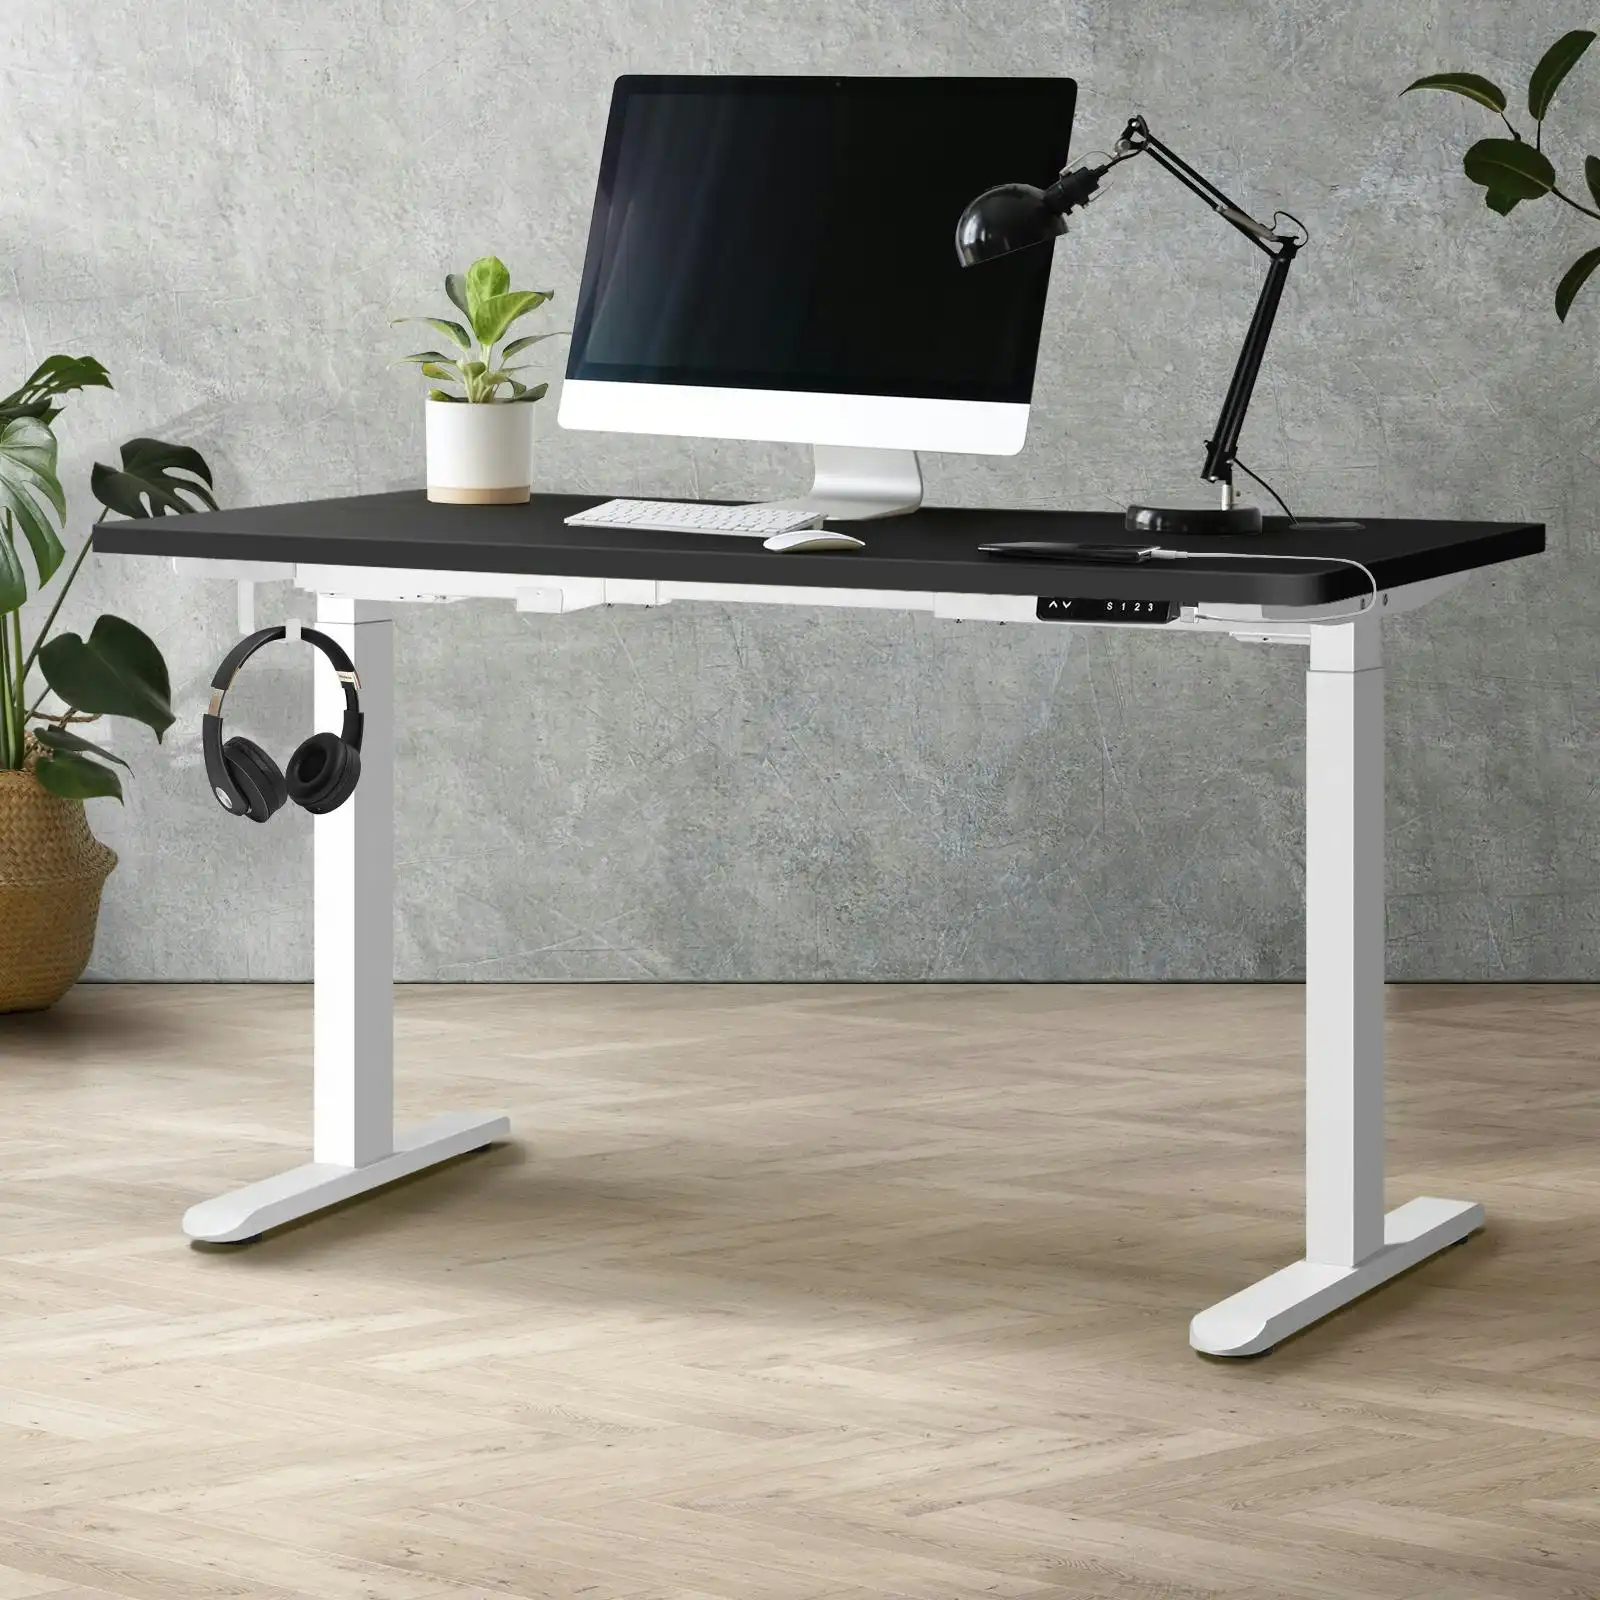 Oikiture 140cm Electric Standing Desk Dual Motor White Frame Black Desktop With USB&Type C Port